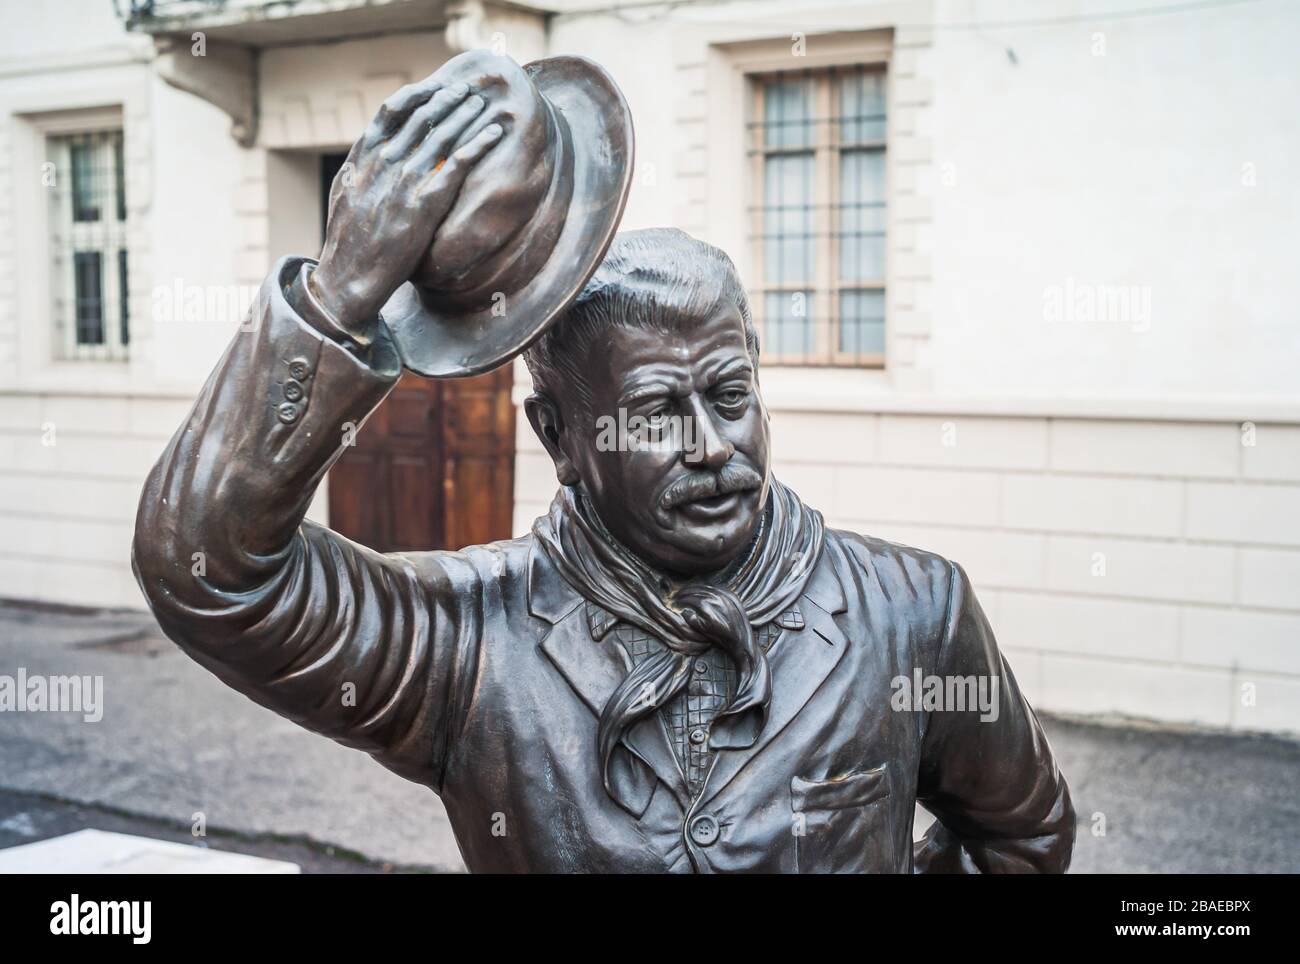 Brescello, Italy - January 1 2014: Bronze Statue of Peppone in Brescello, a Famous Movie Character based on the Don Camillo Books by Giovannino Guares Stock Photo